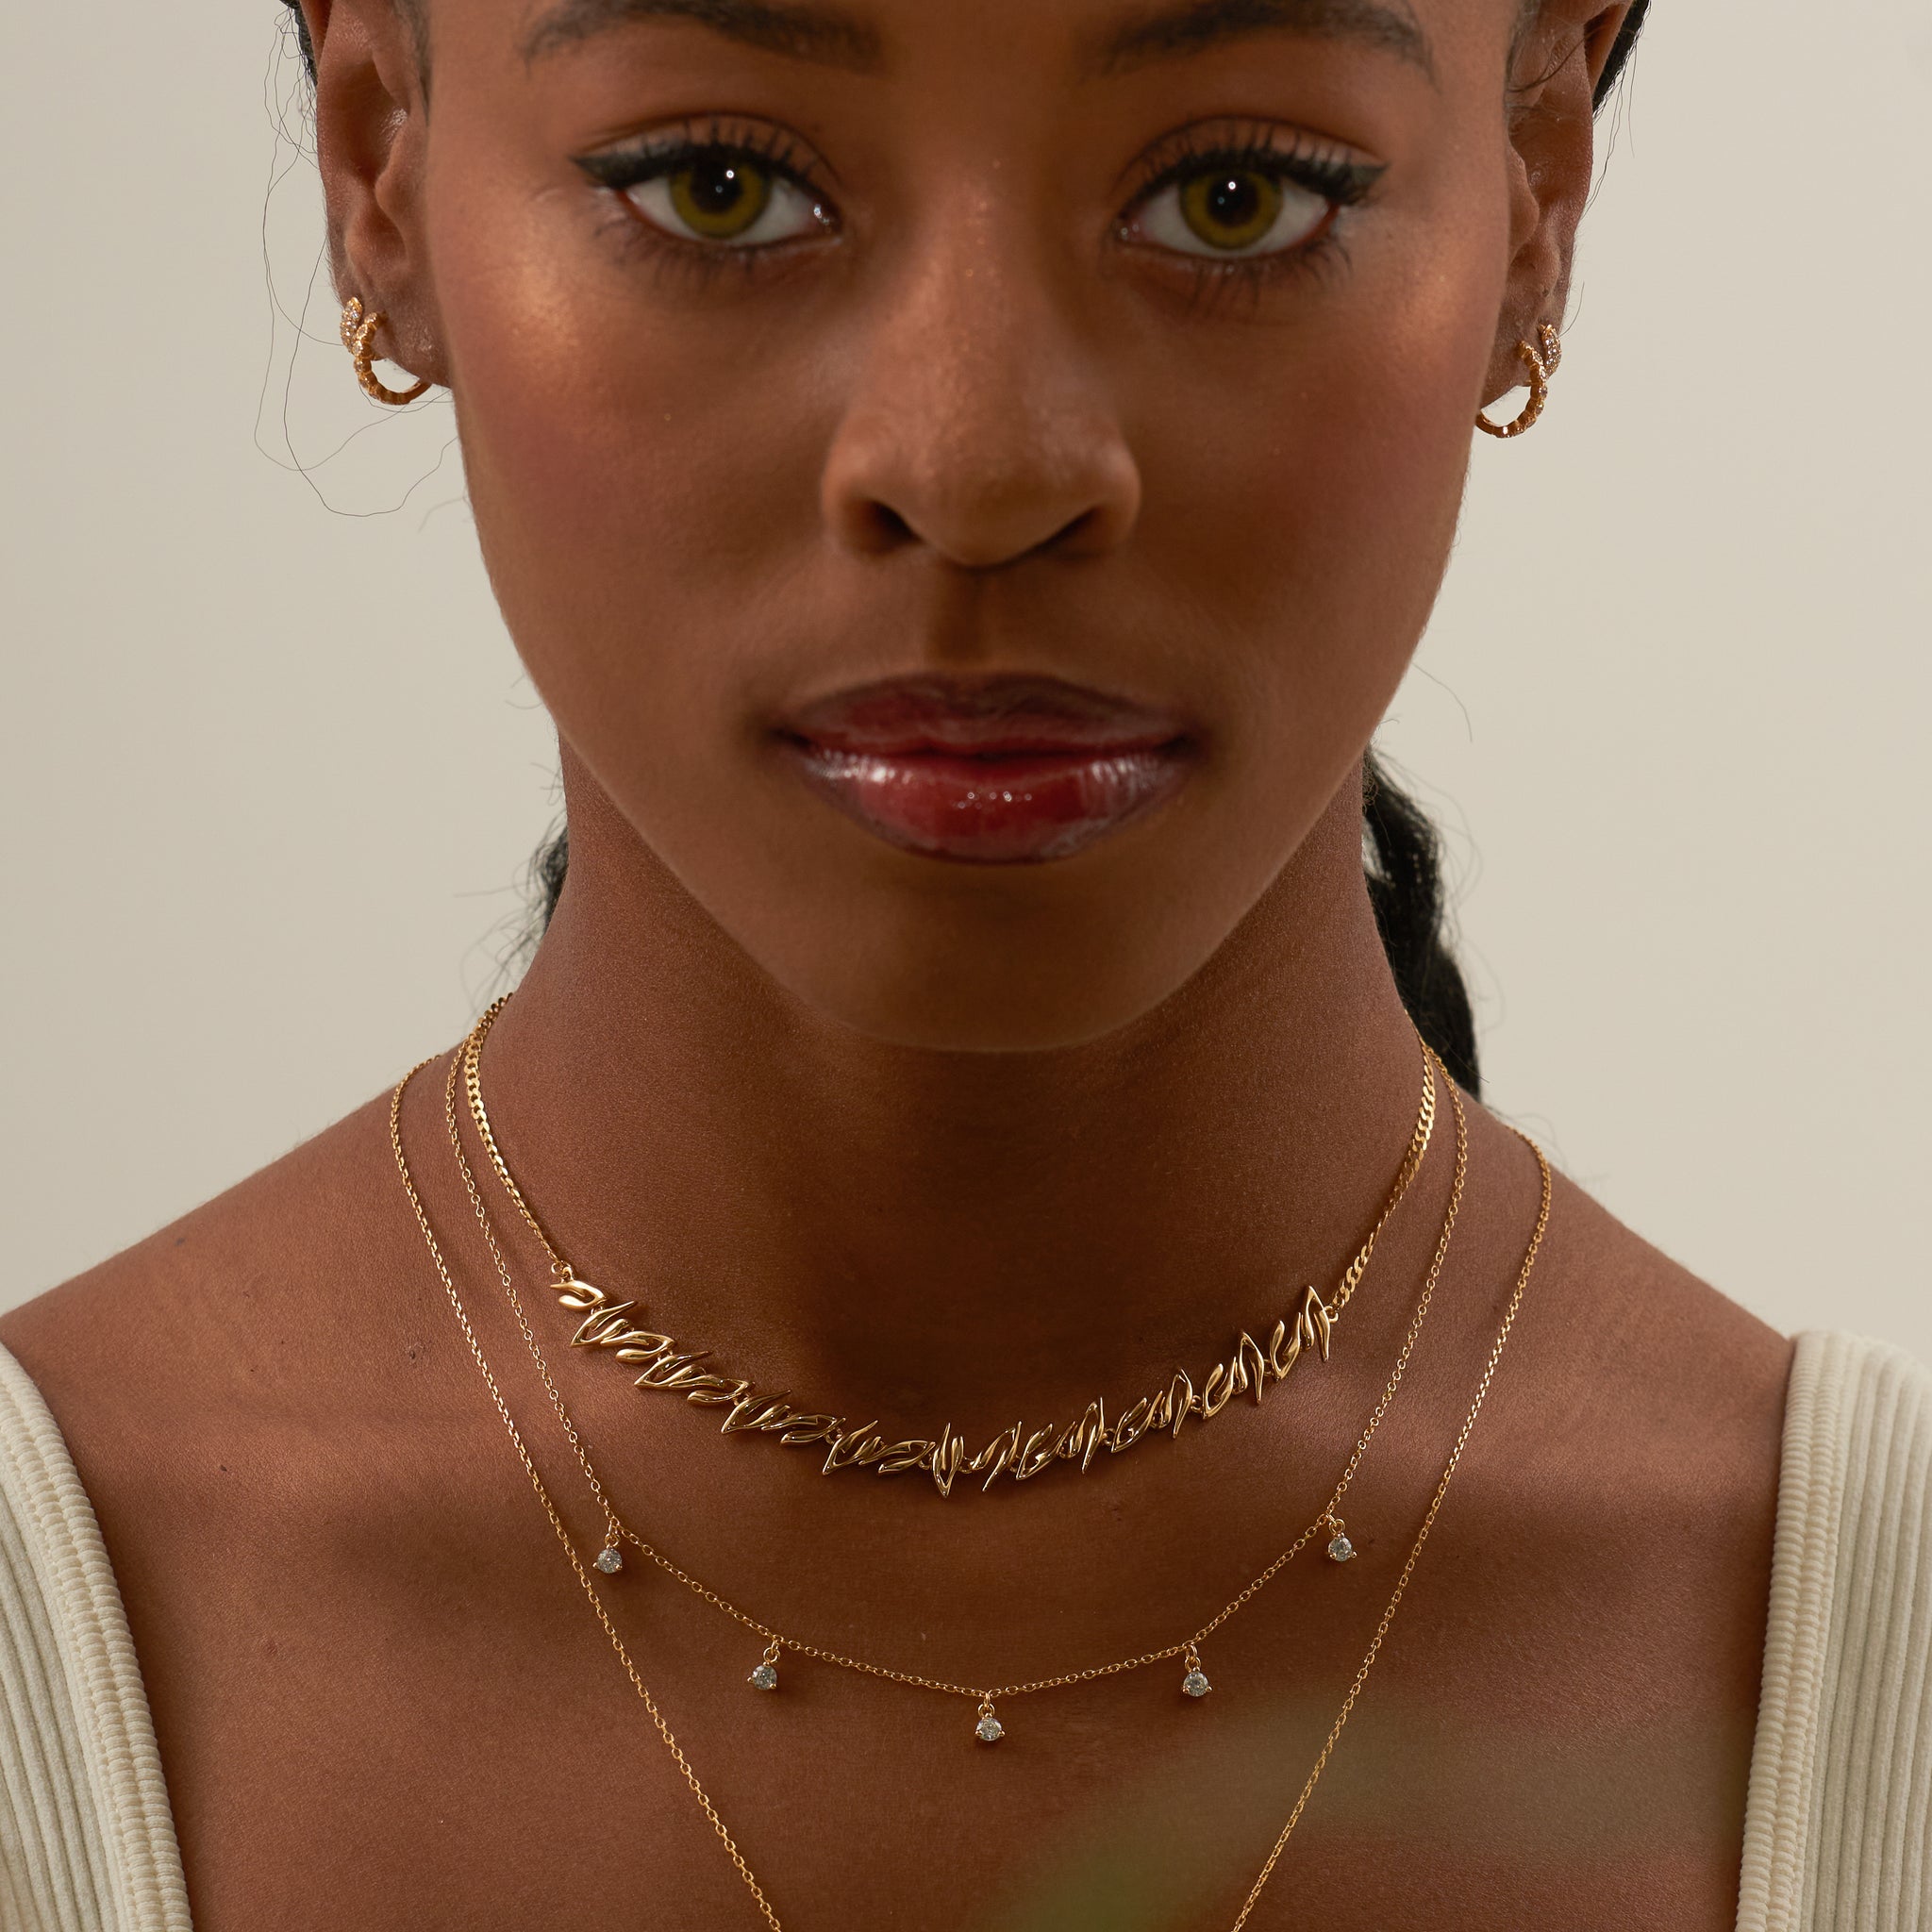 Doviana Signature Choker Necklace in Gold Featured on Vogue